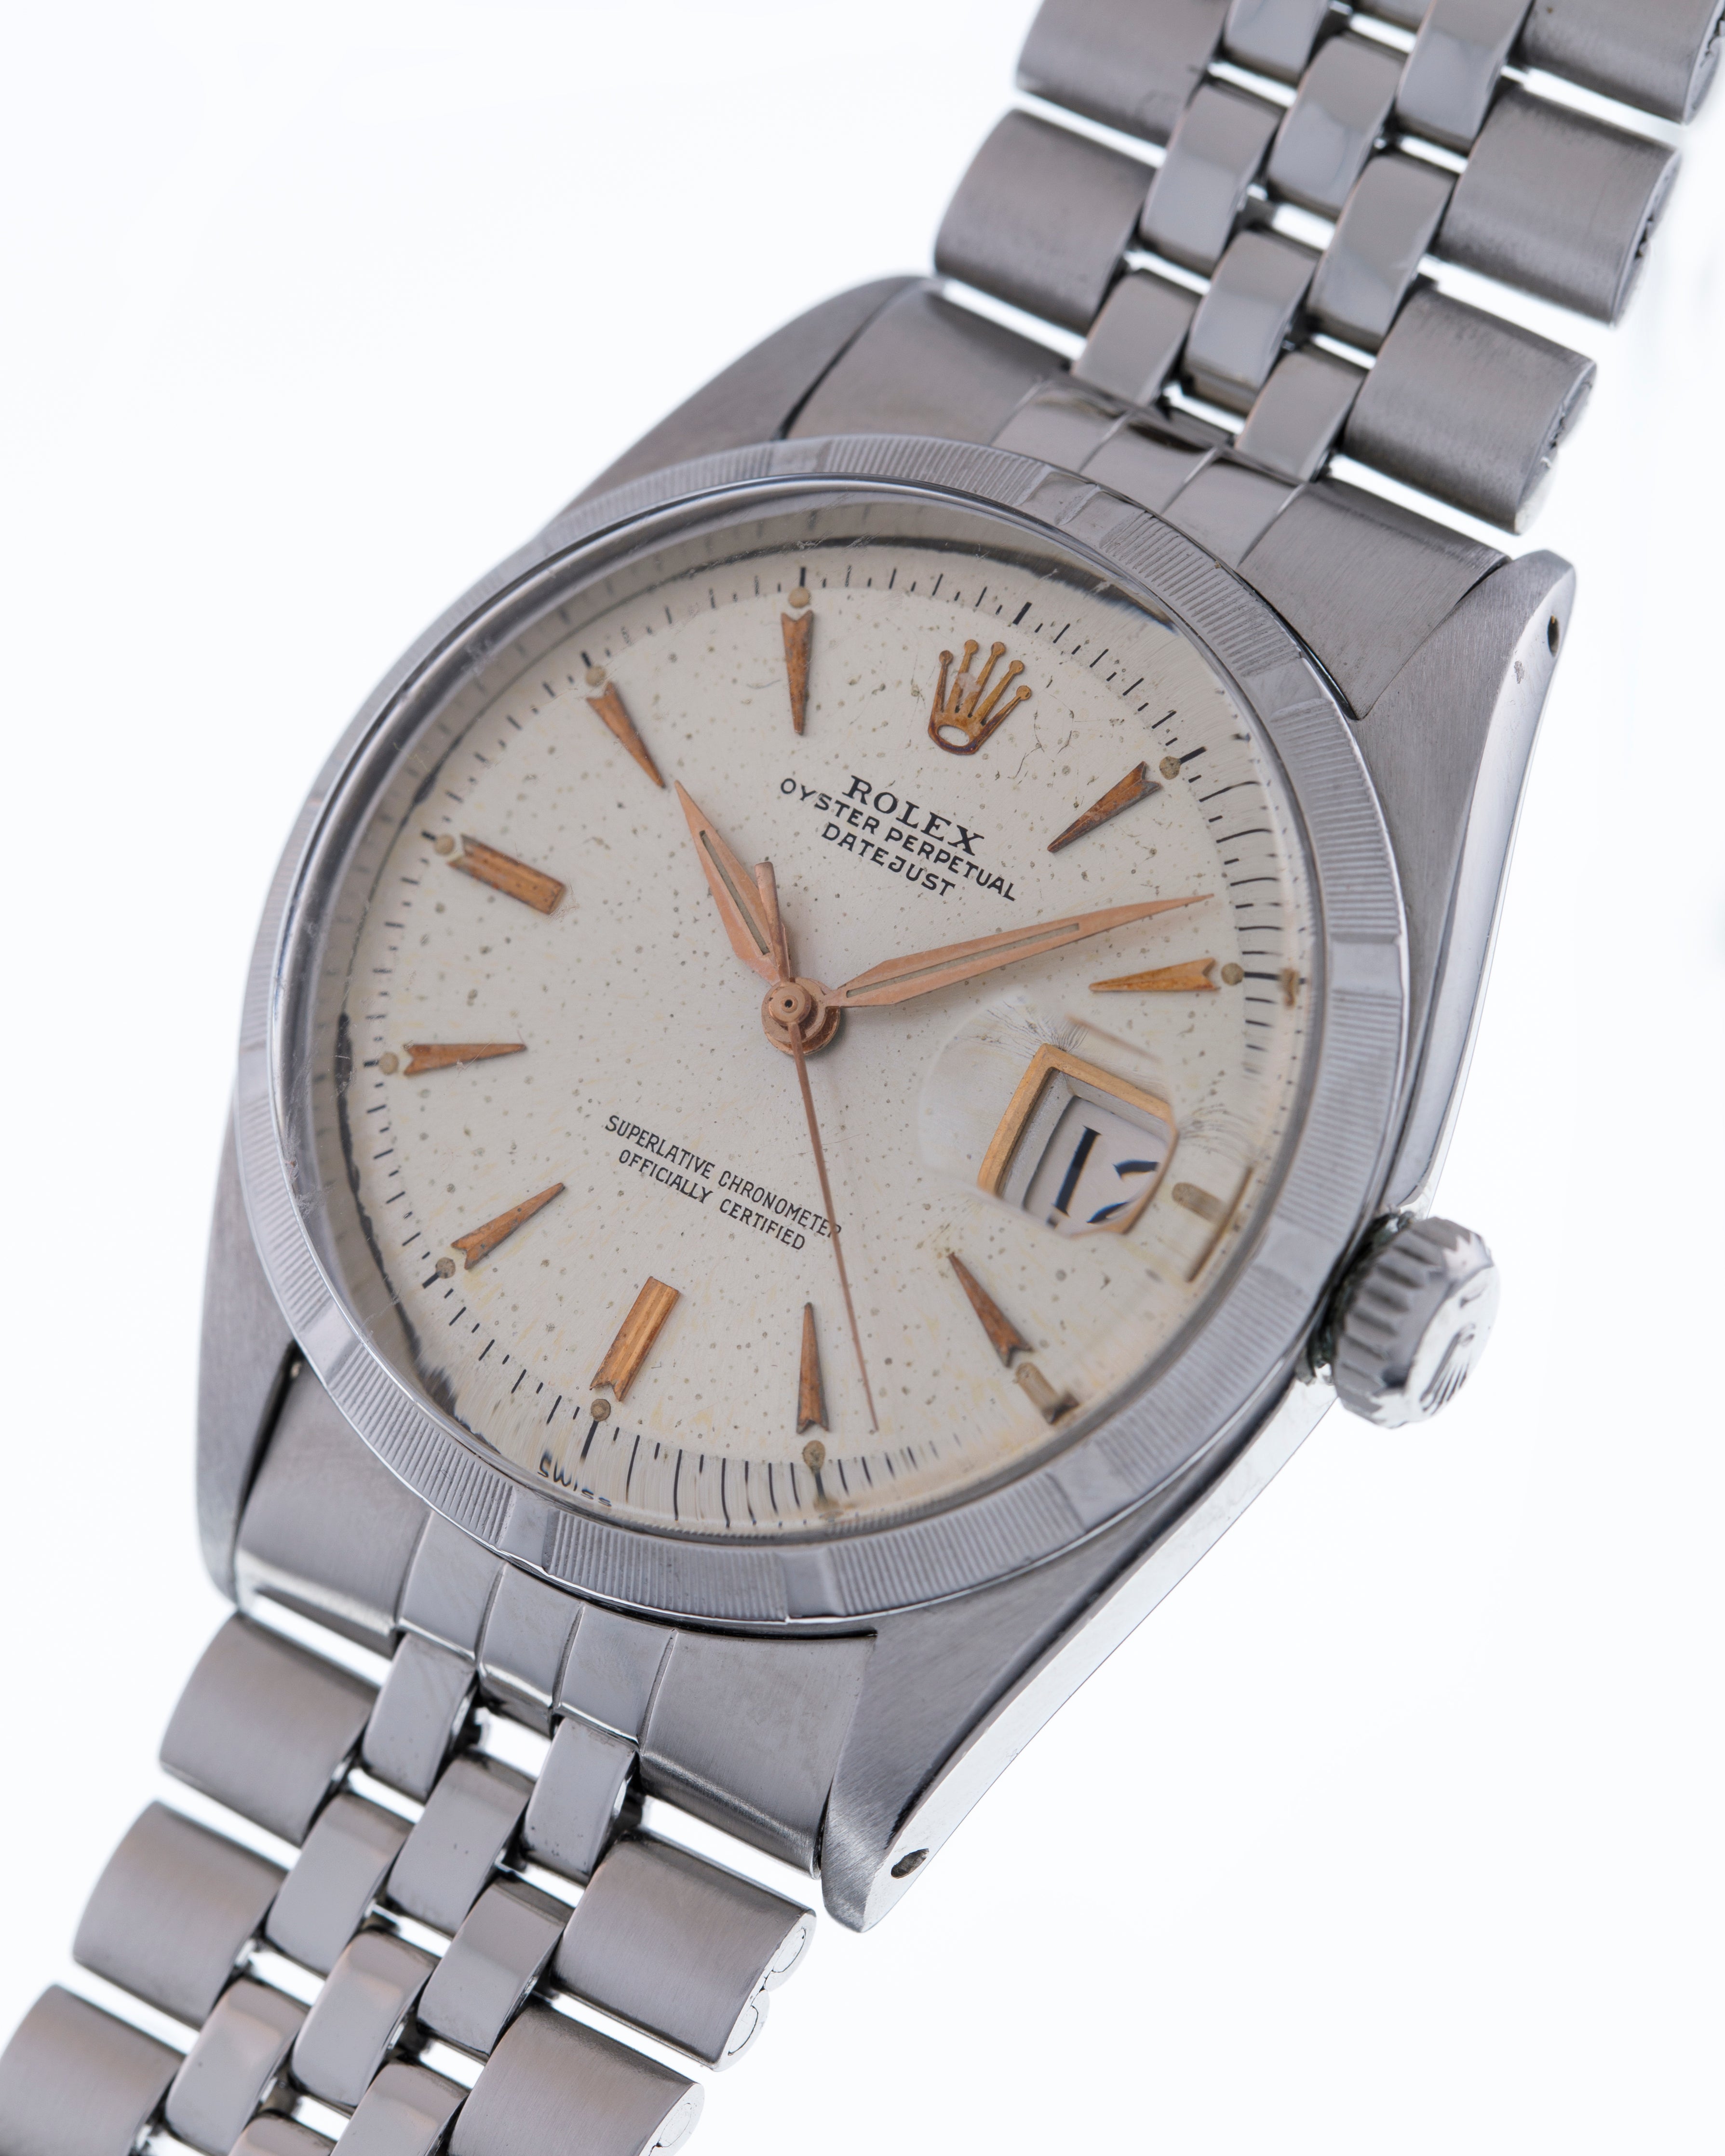 Rolex date just reference 6303